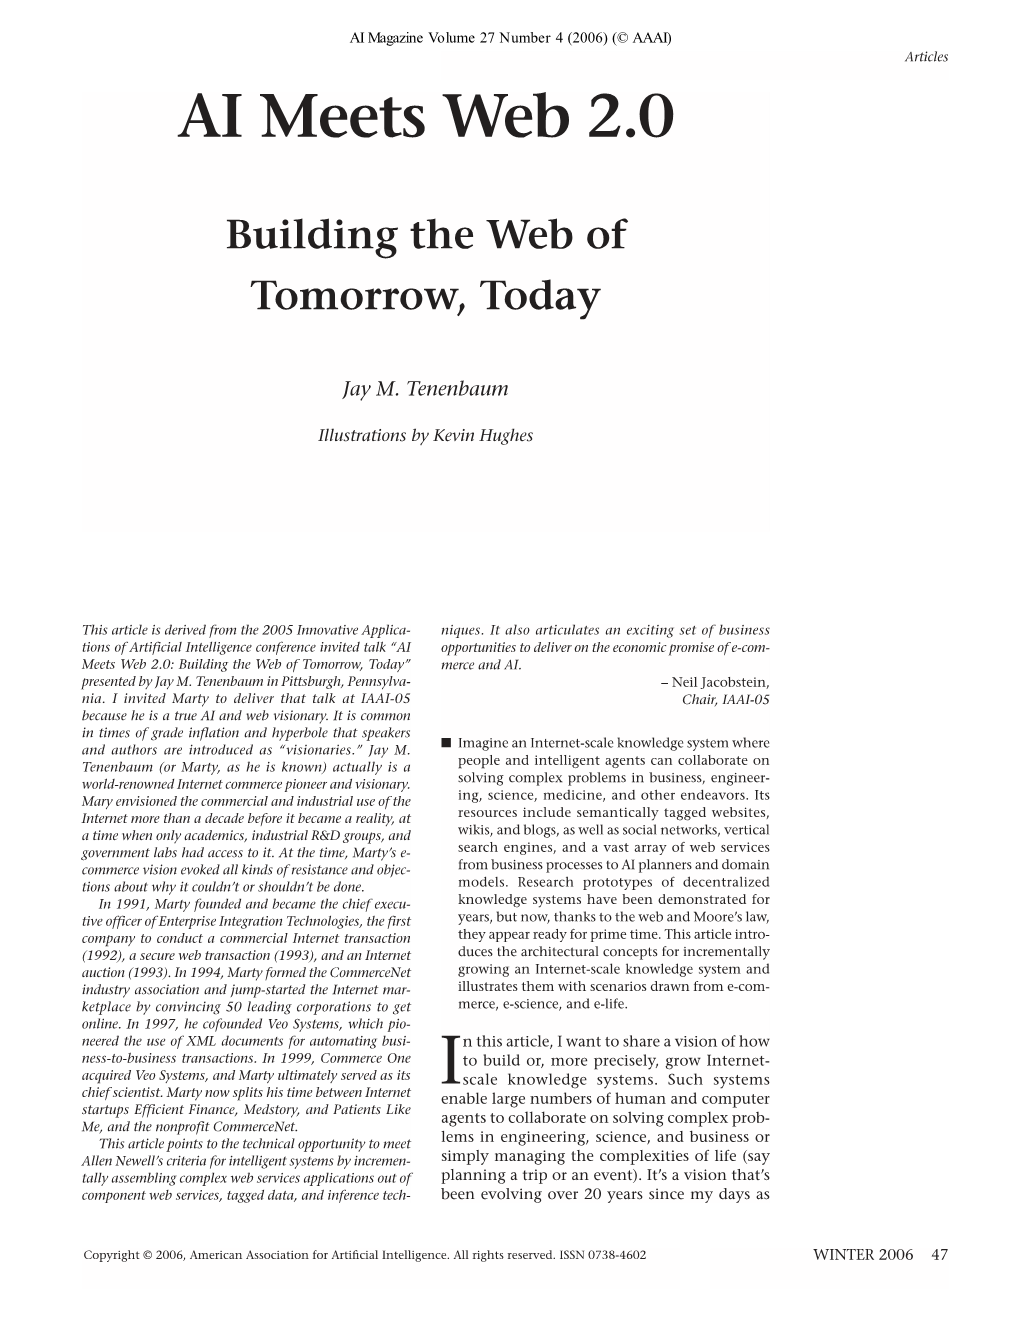 AI Meets Web 2.0: Building the Web of Tomorrow, Today